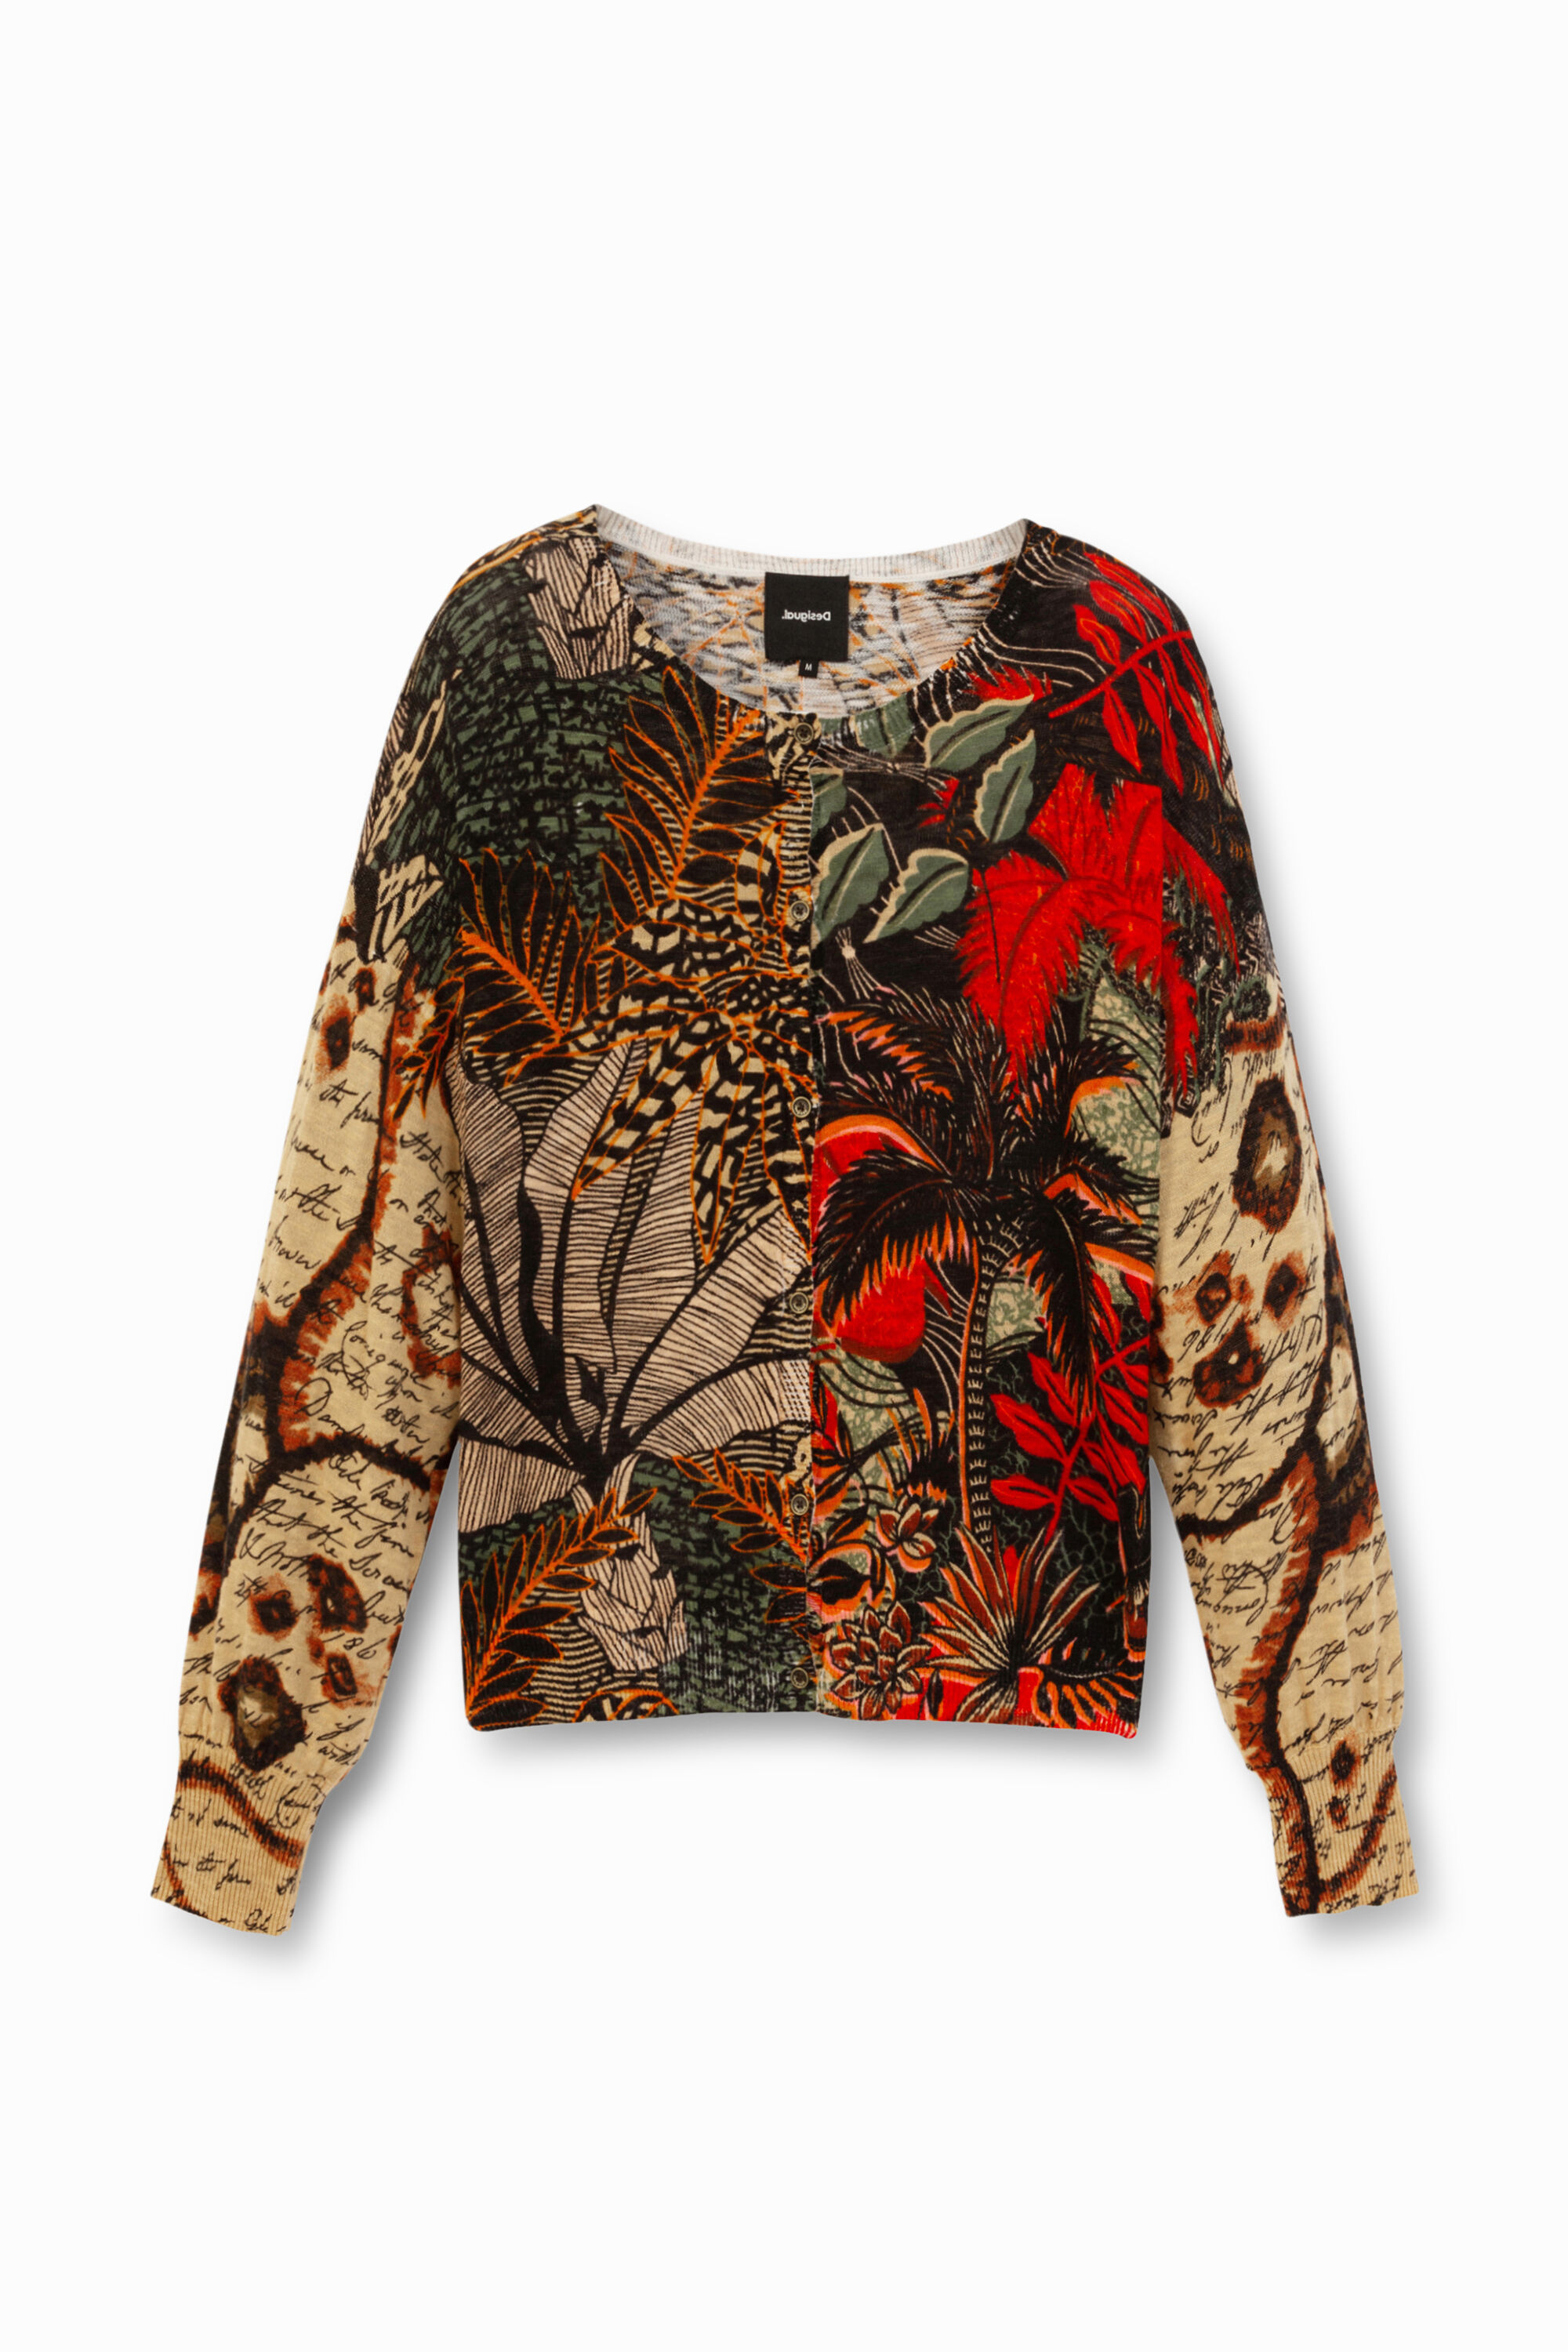 Desigual Tricot Tropical Jacket In Brown